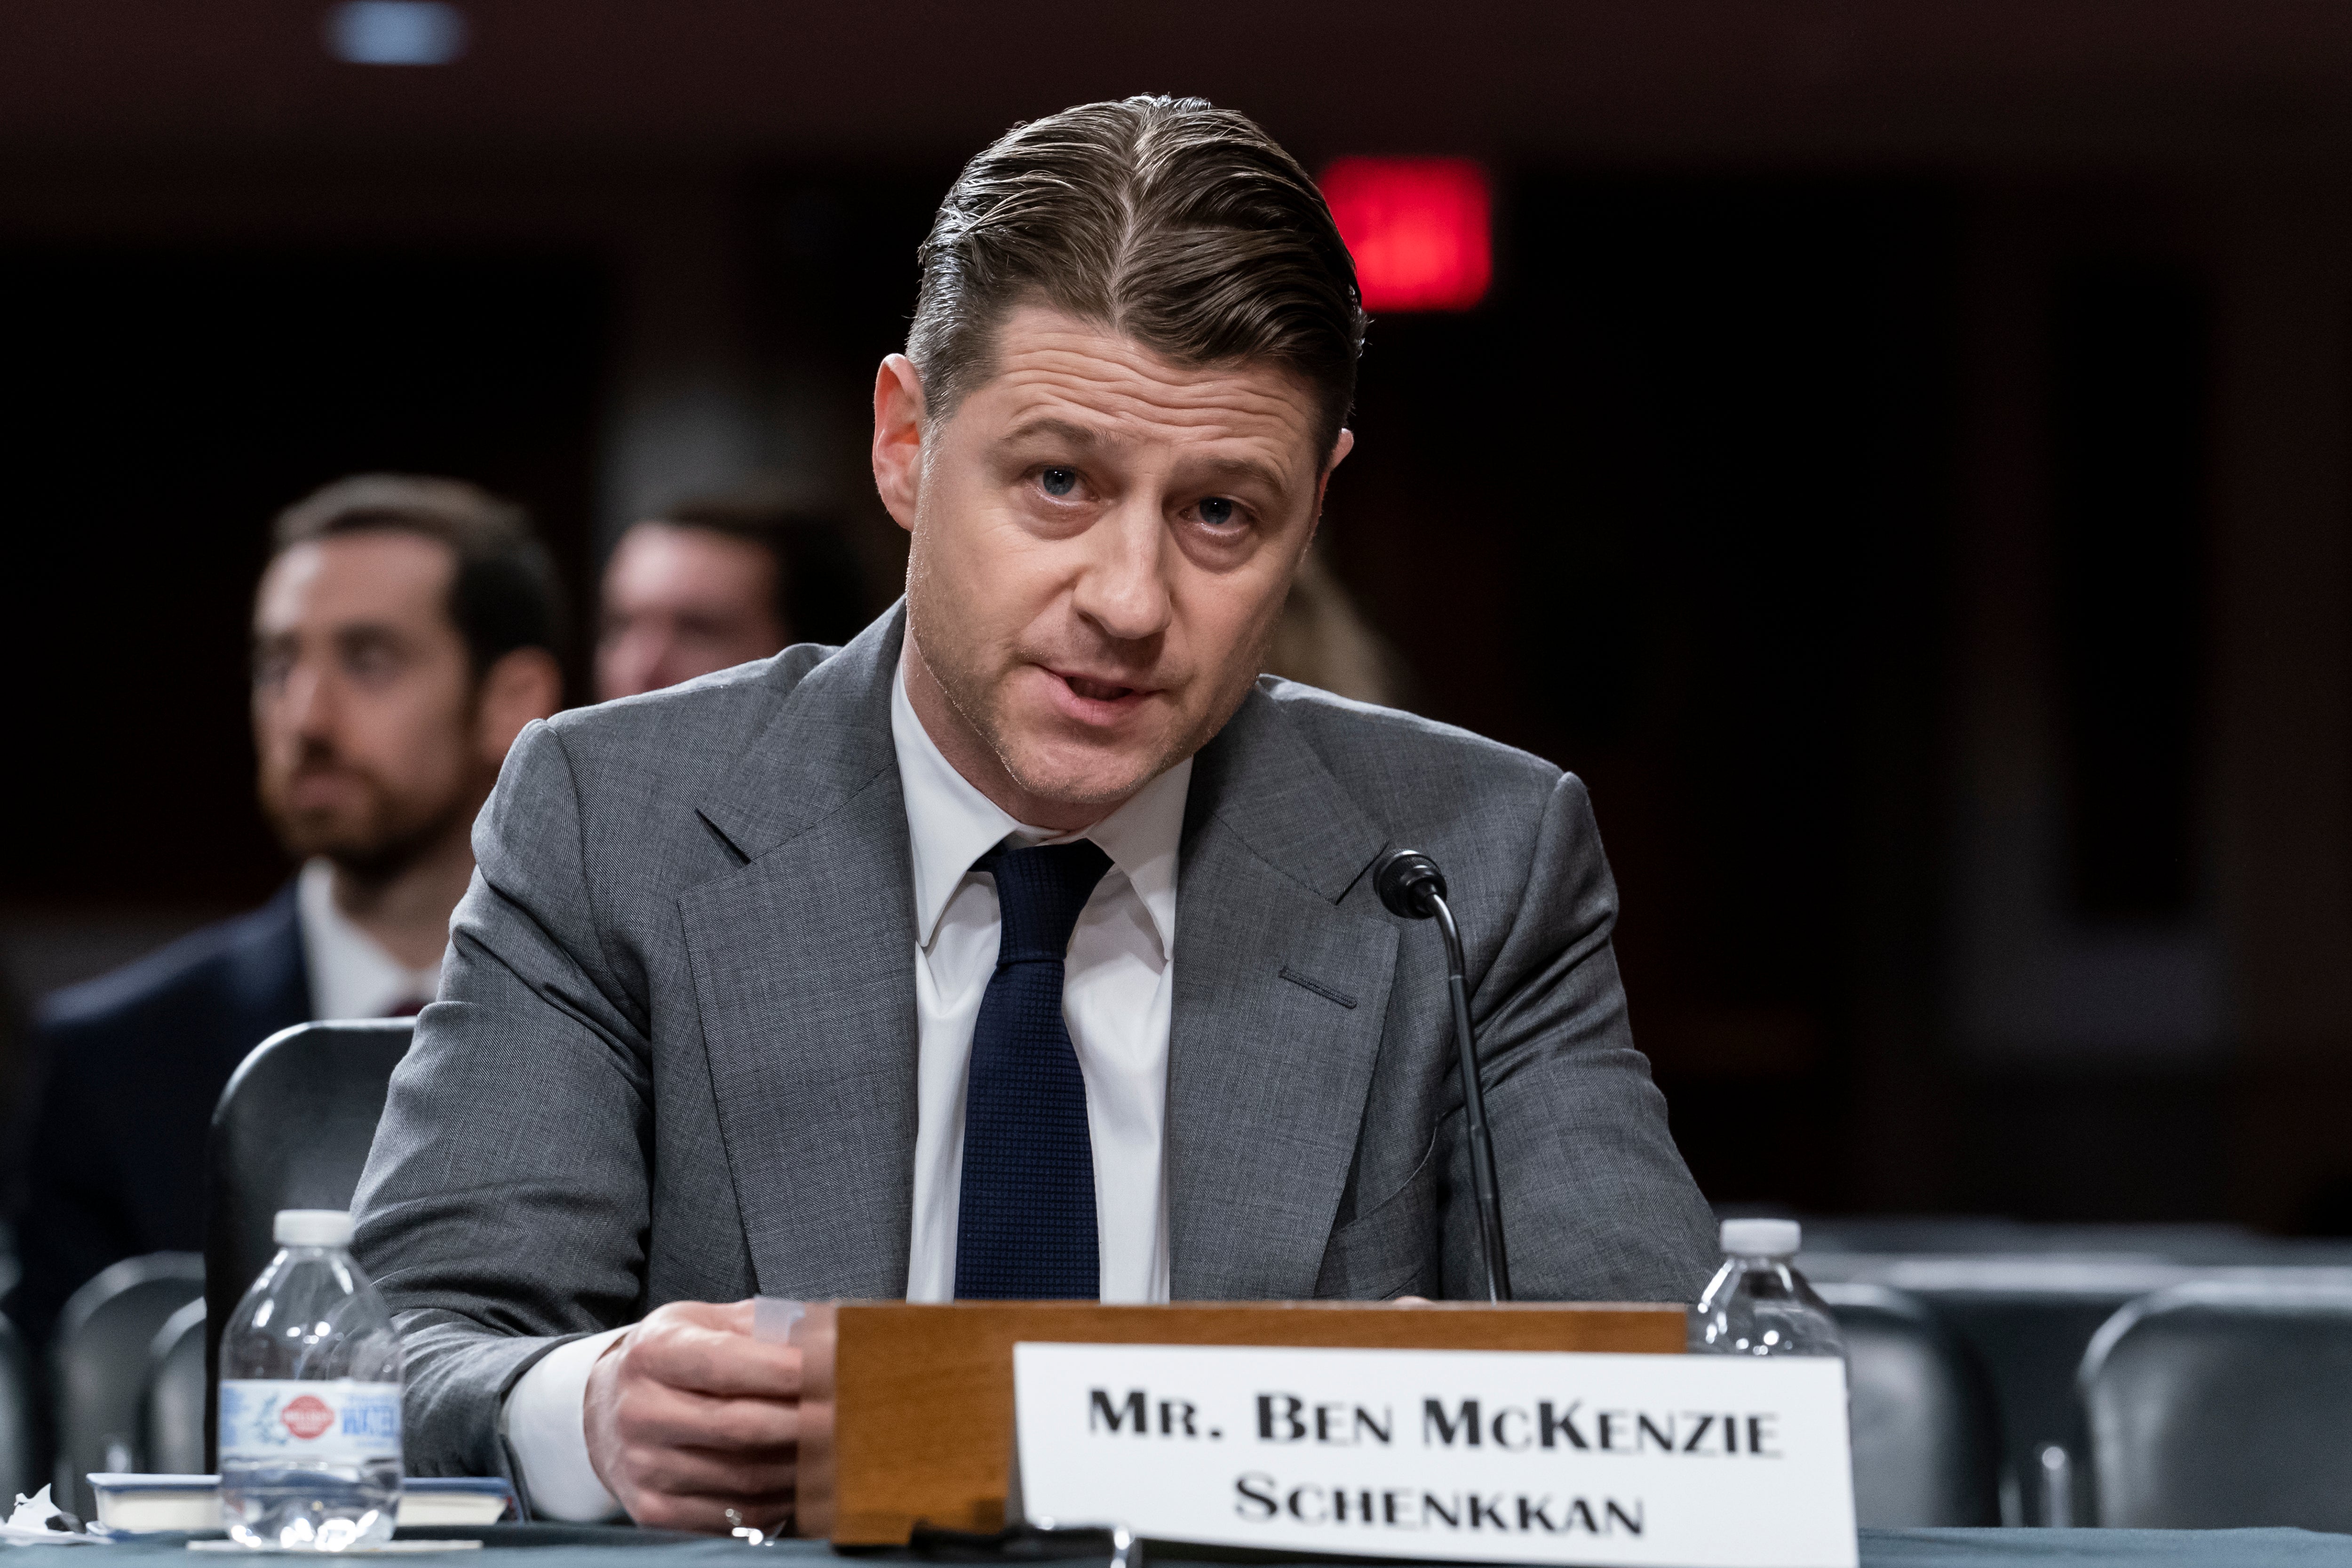 Ben McKenzie testifies during a Senate Banking Committee hearing on cryptocurrency and the collapse of the FTX crypto exchange in December 2022